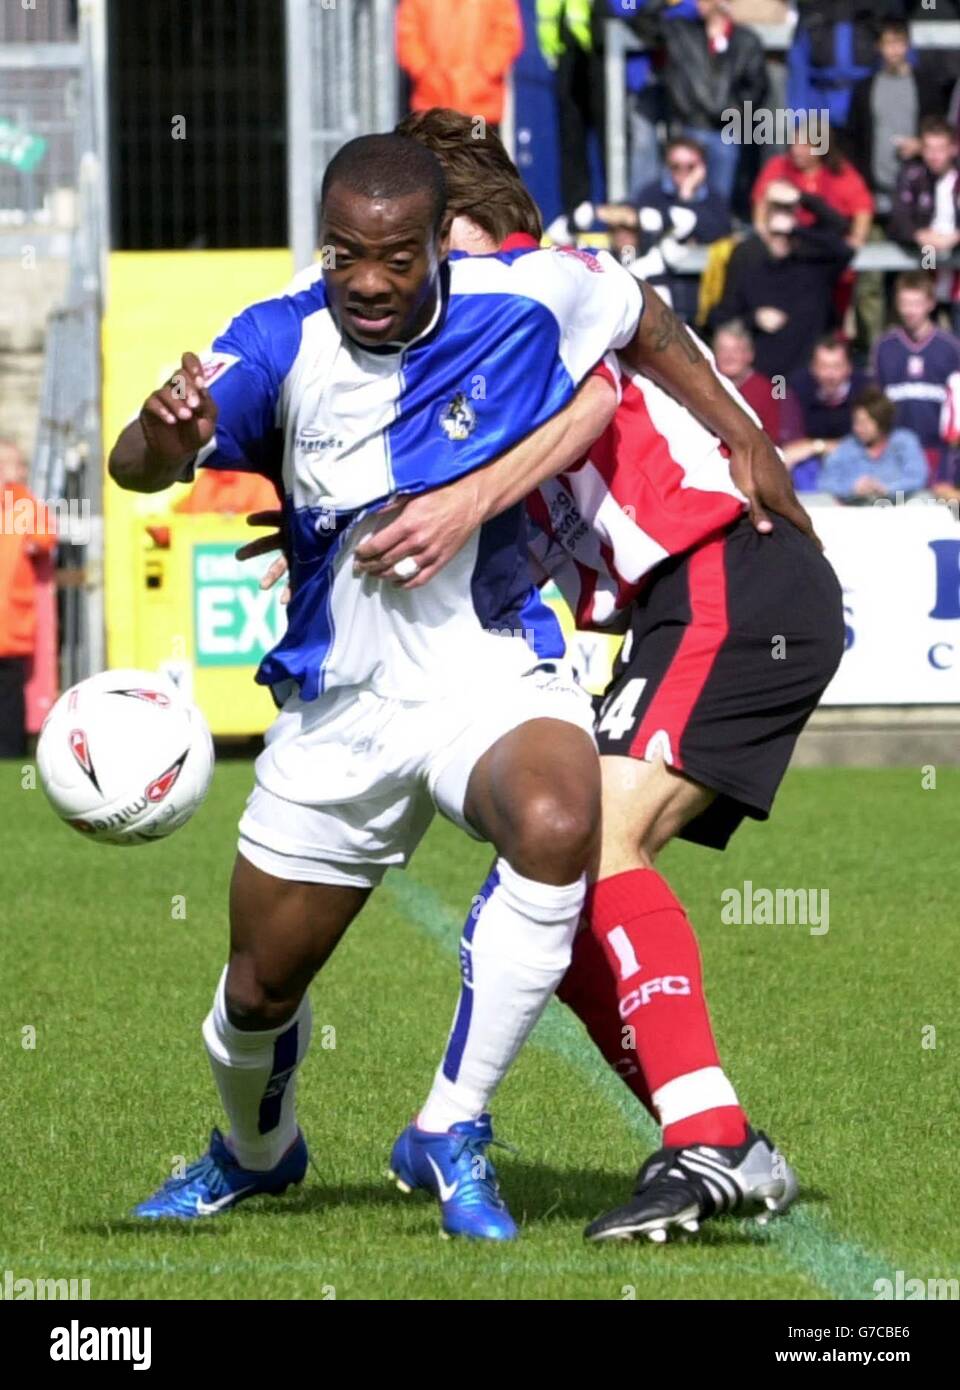 Bristol Rovers' Junior Agogo goes past Lincoln City's Ben Futcher during the Coca Cola League One match at the Memorial Ground, Bristol, Saturday September 18, 2004. NO UNOFFICIAL CLUB WEBSITE USE. Stock Photo